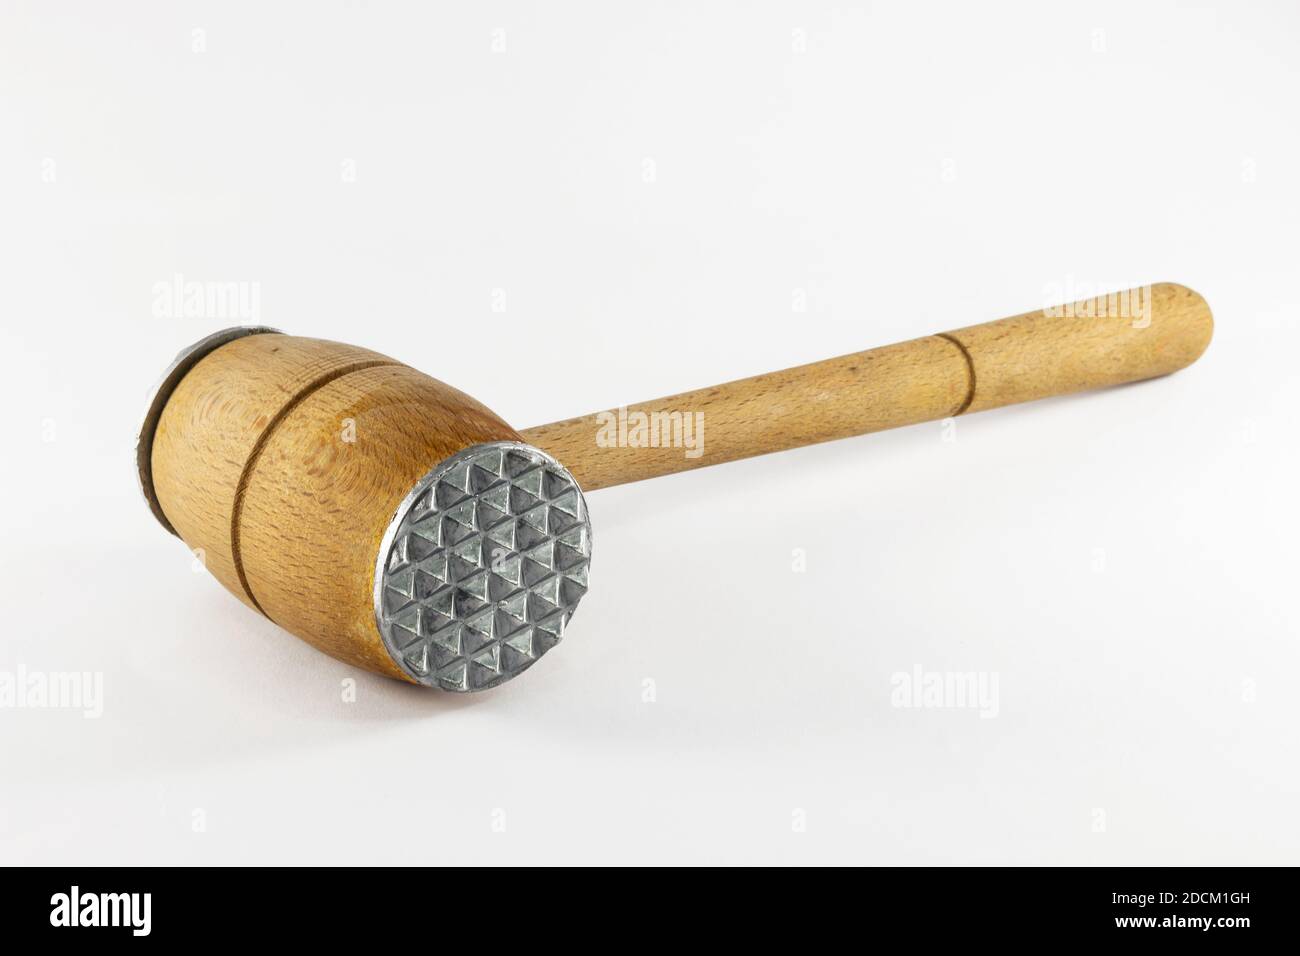 Old rustic wooden meat mallet hammer, isolated on white background. Stock Photo